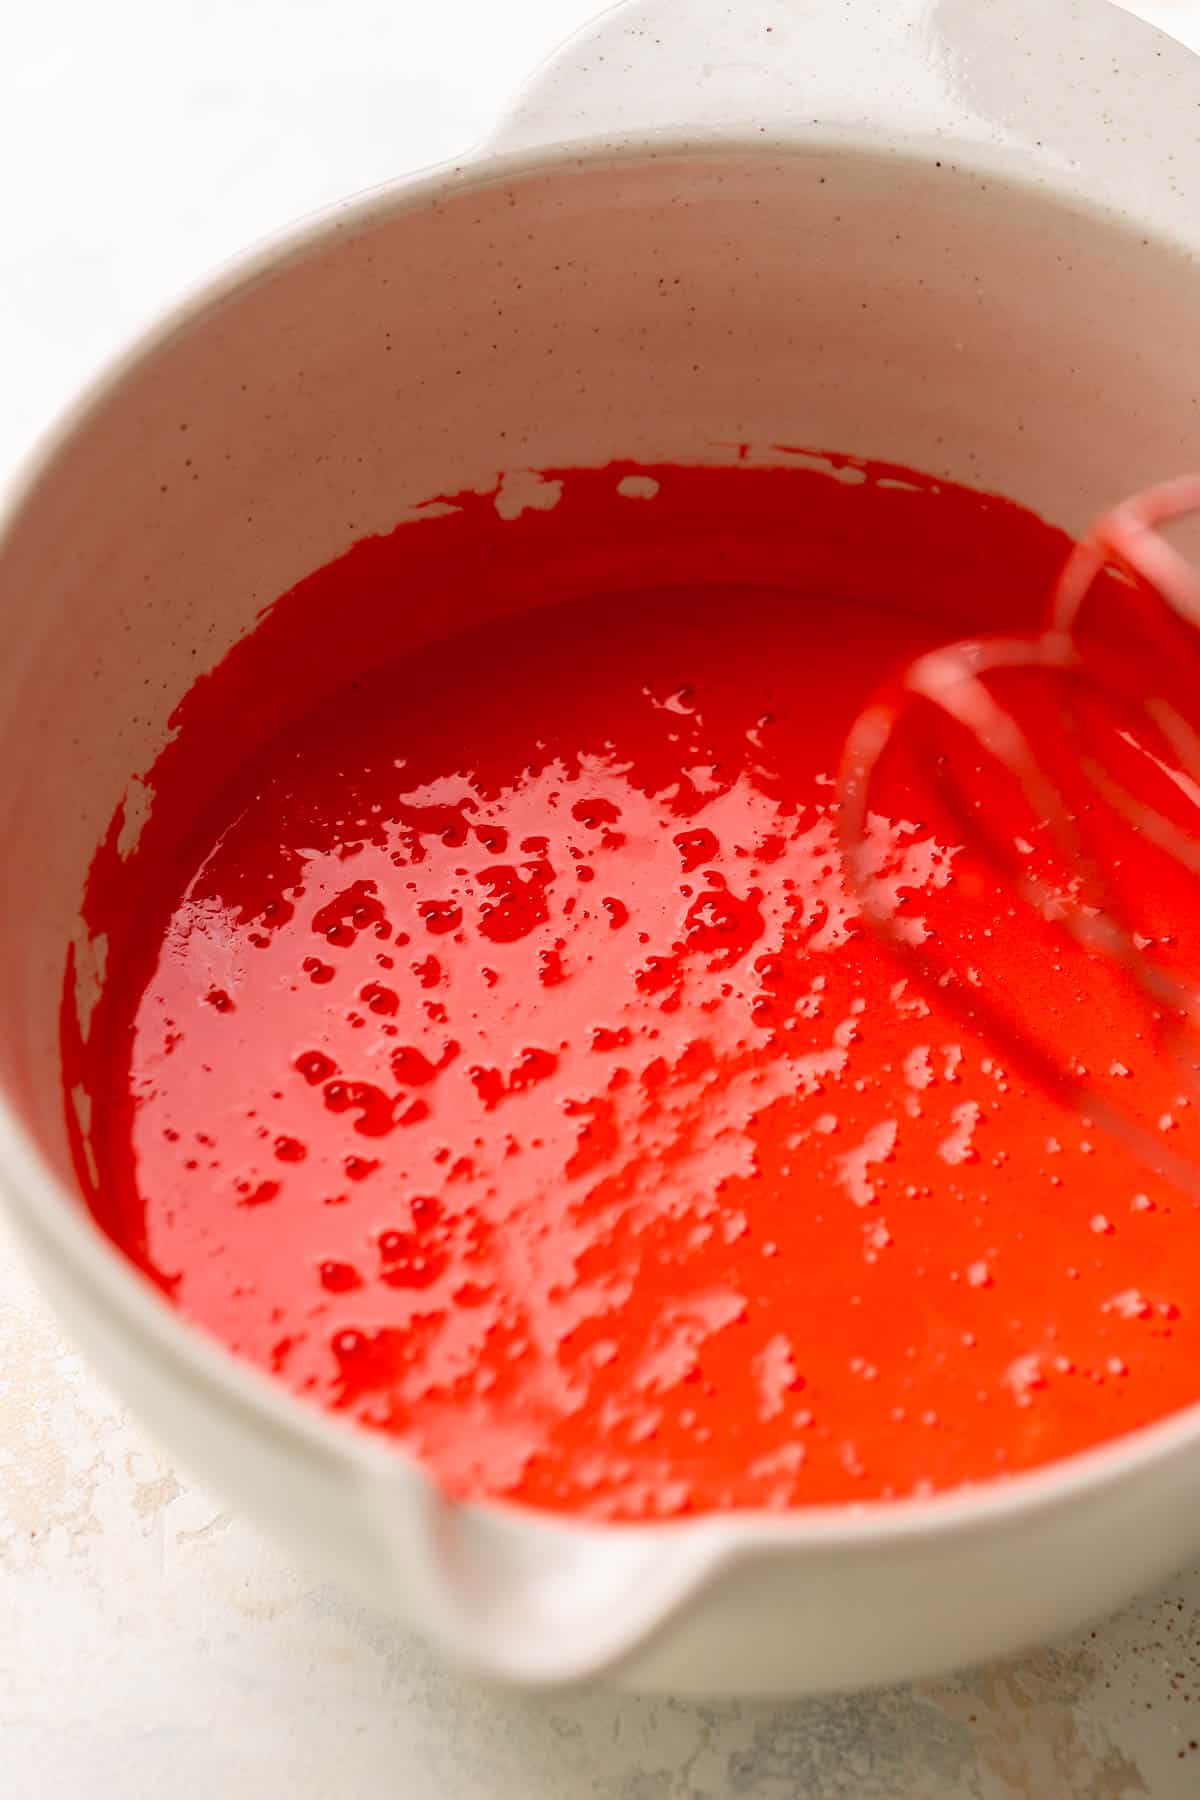 A mixing bowl with the bright red brownie batter after mixing.